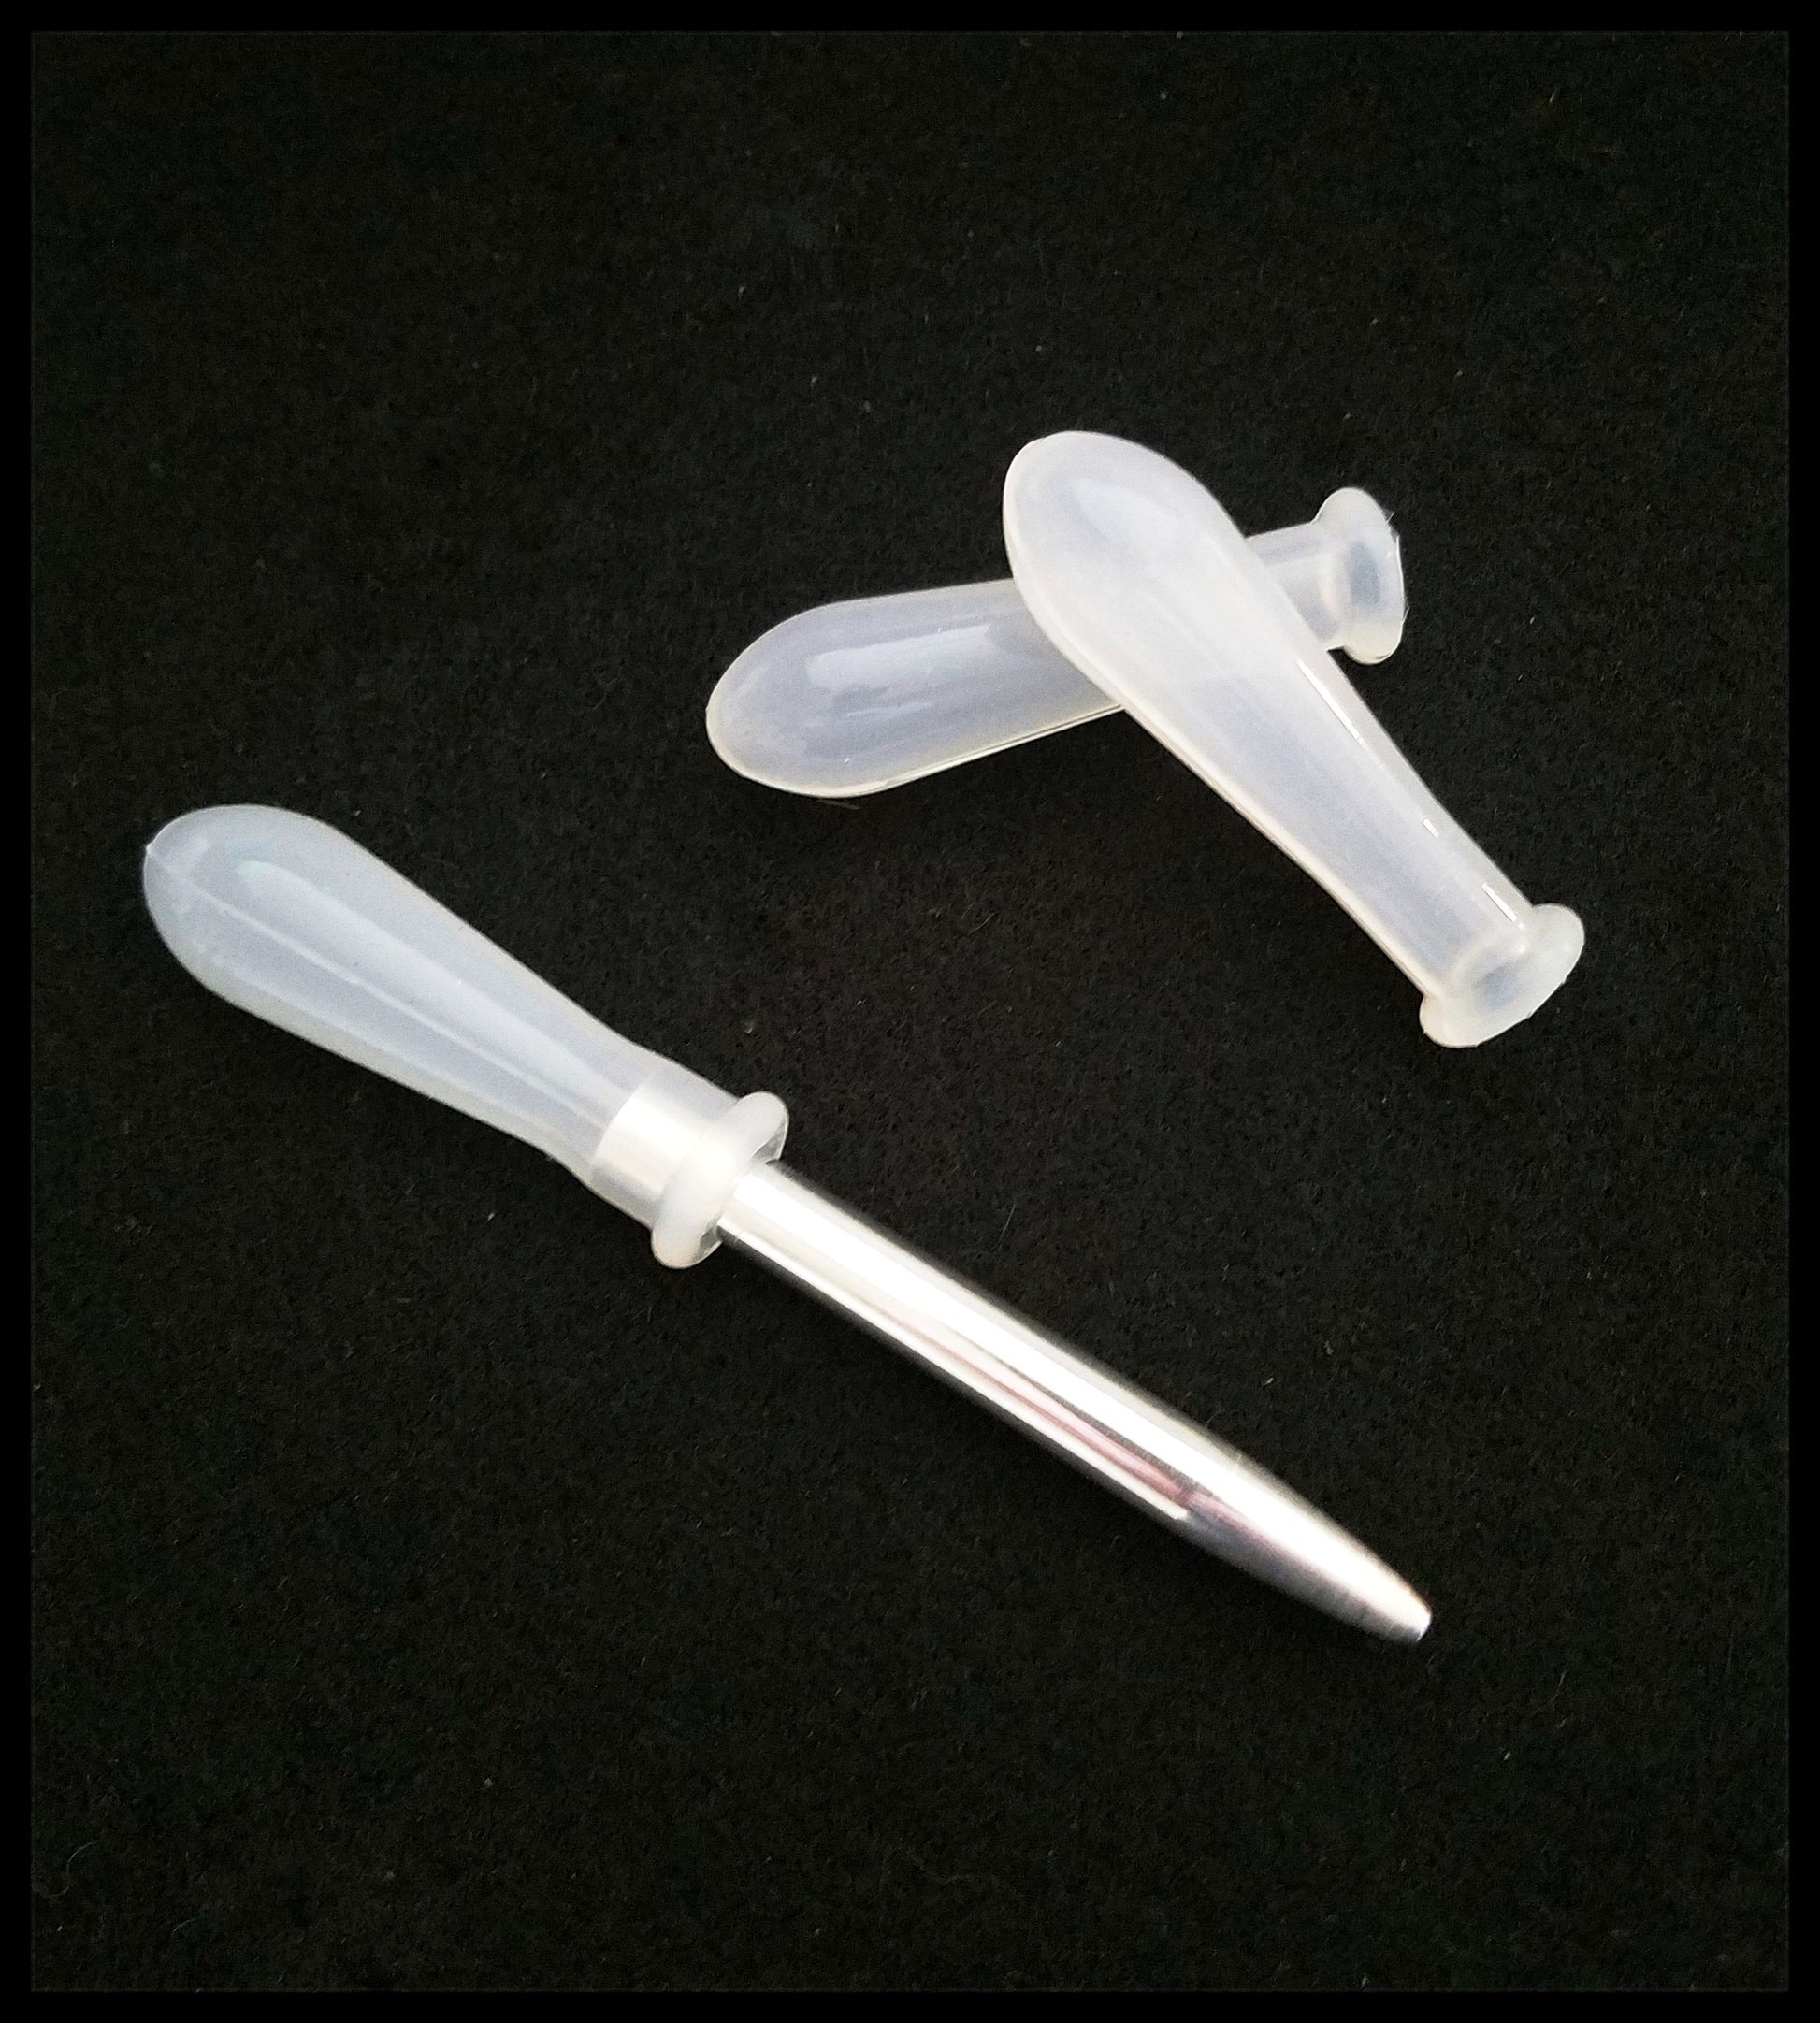 Silicone Replacement Bulb for Metal Pipette 2 inch | Size Large - Elizabeth Schowachert Art